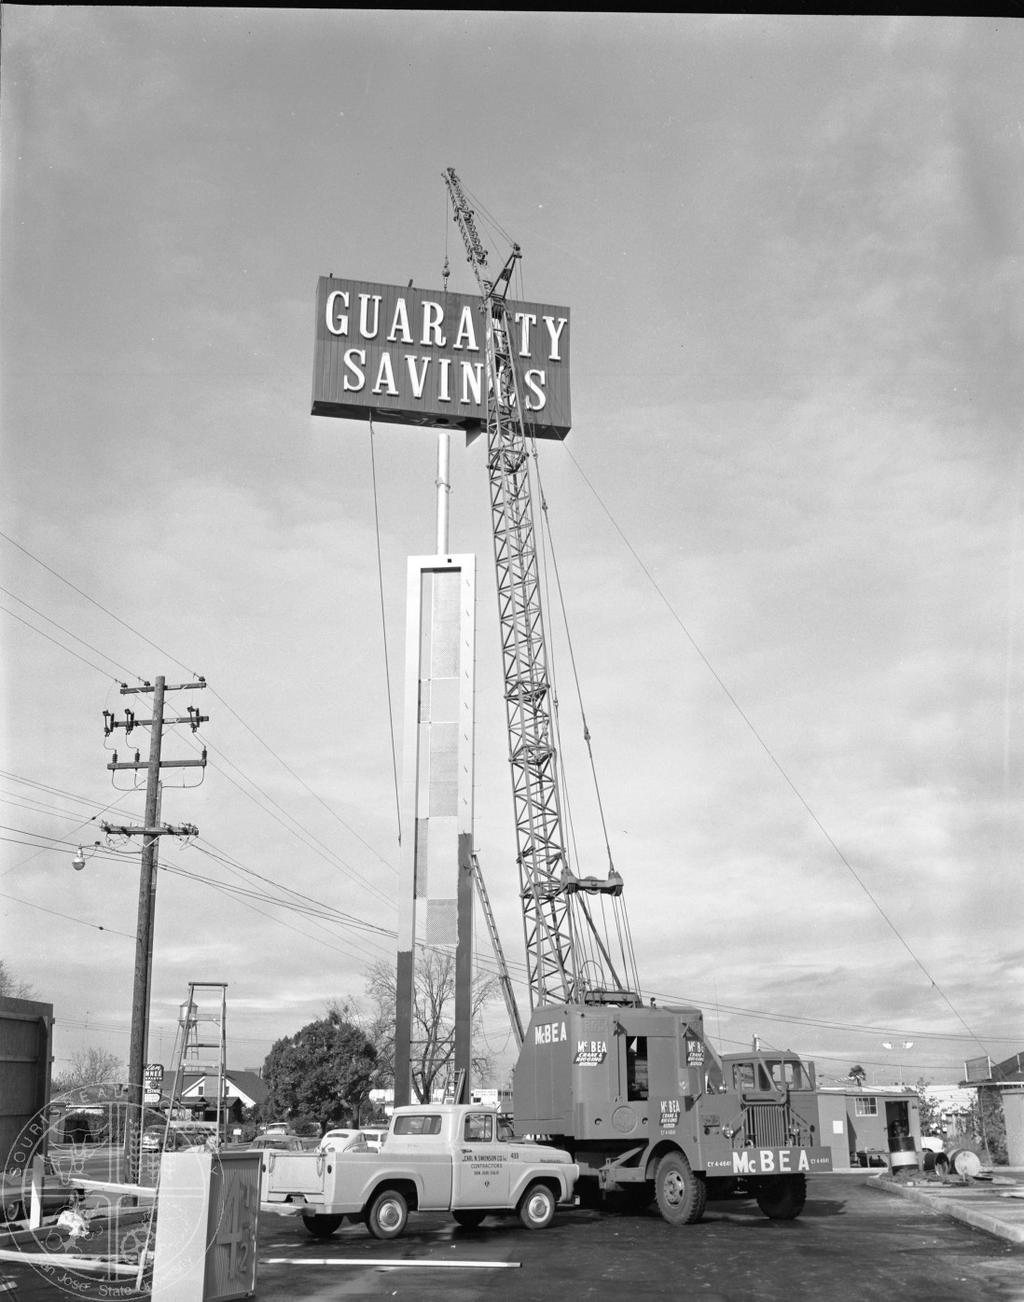 [67] Guaranty Savings, 1962 - Up, up, up it goes. hoisted into the sky by a giant crane.